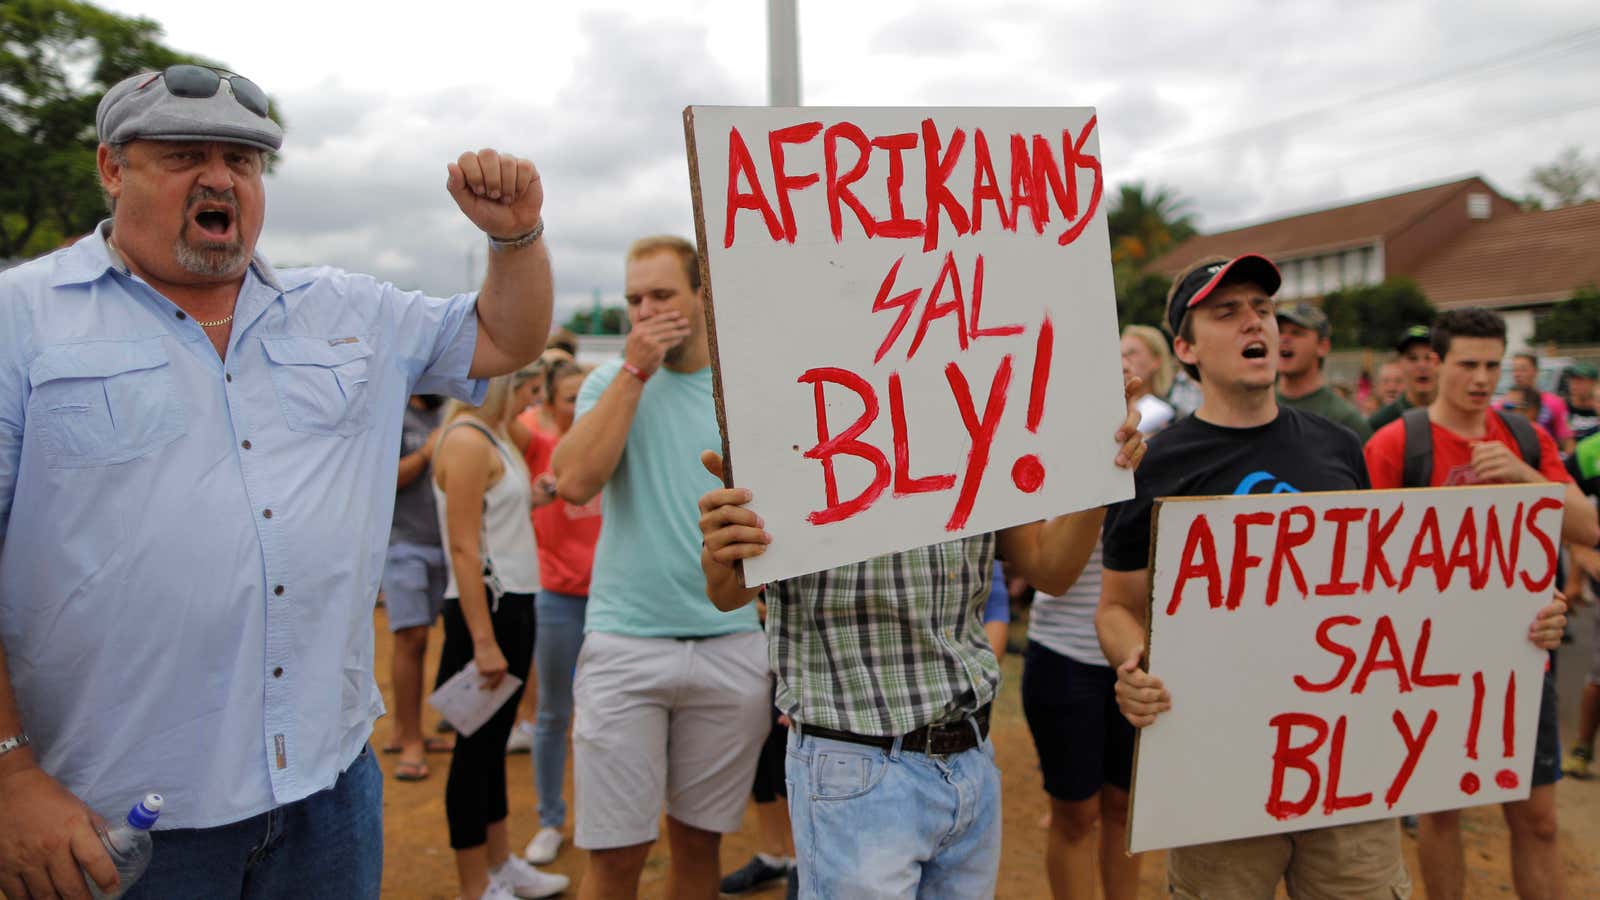 Yes, Afrikaans will stay, but with whom?